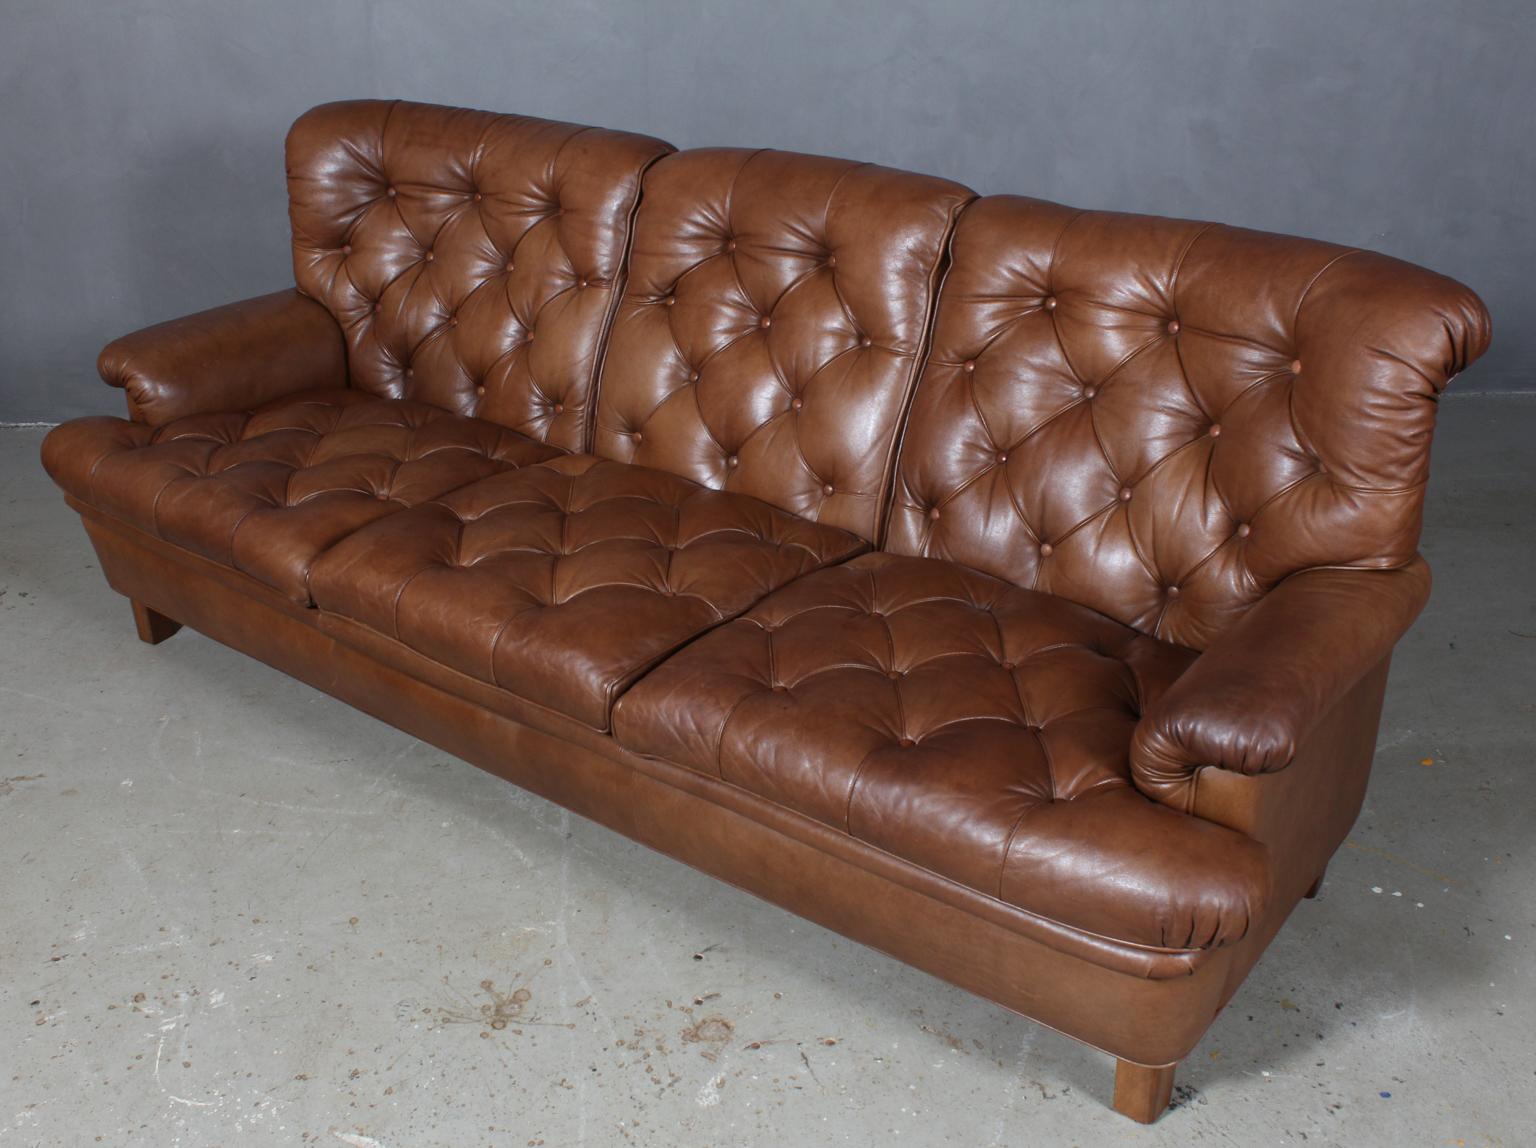 Arne Norell three-seat sofa with legs of stained beech

Original brown leather upholstery.

Made by Norell.